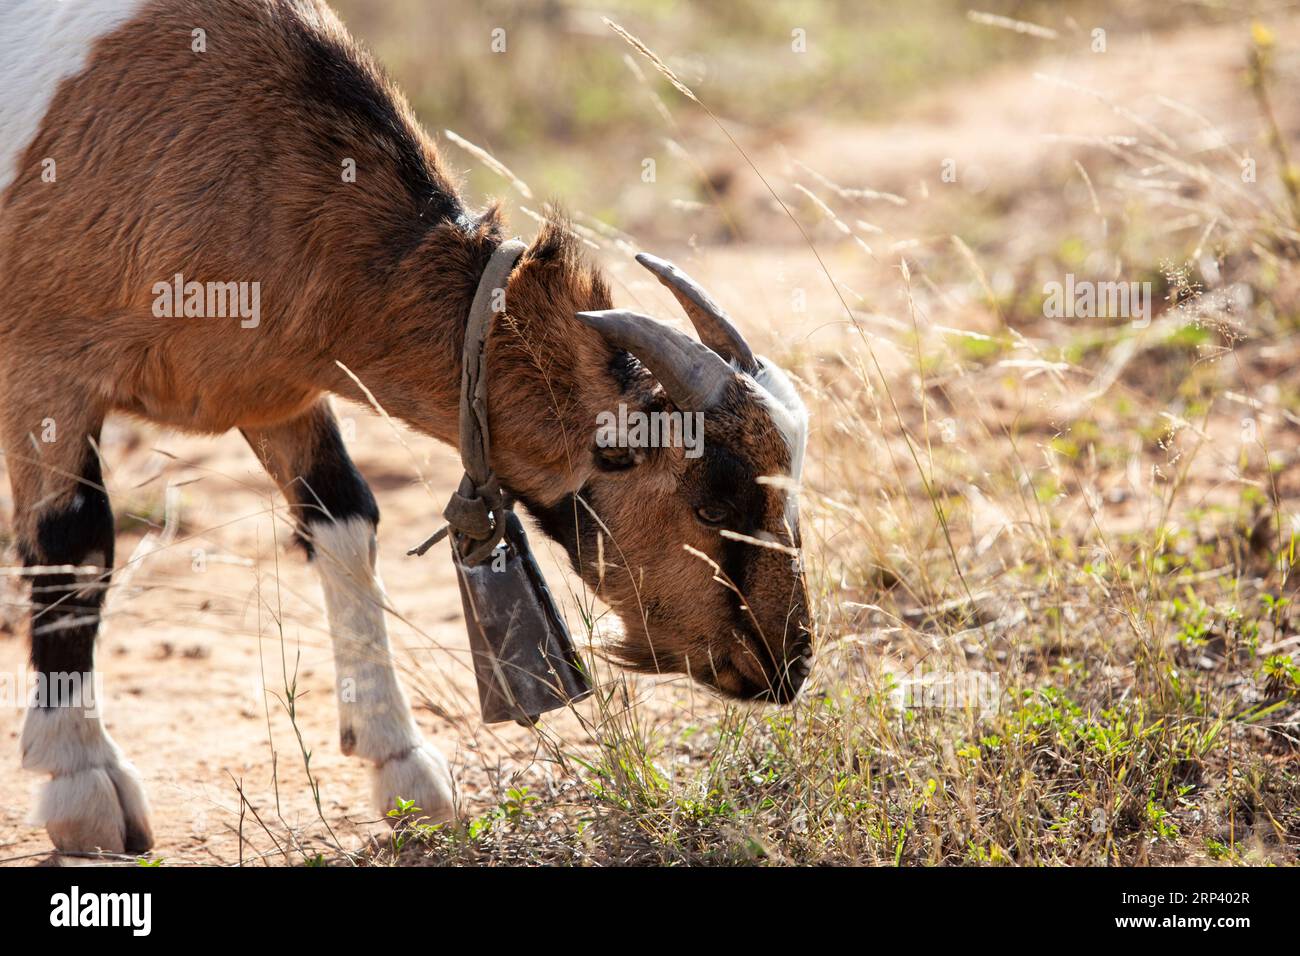 goat wearing a cowbell for the herder to track it during nomadic movements Stock Photo